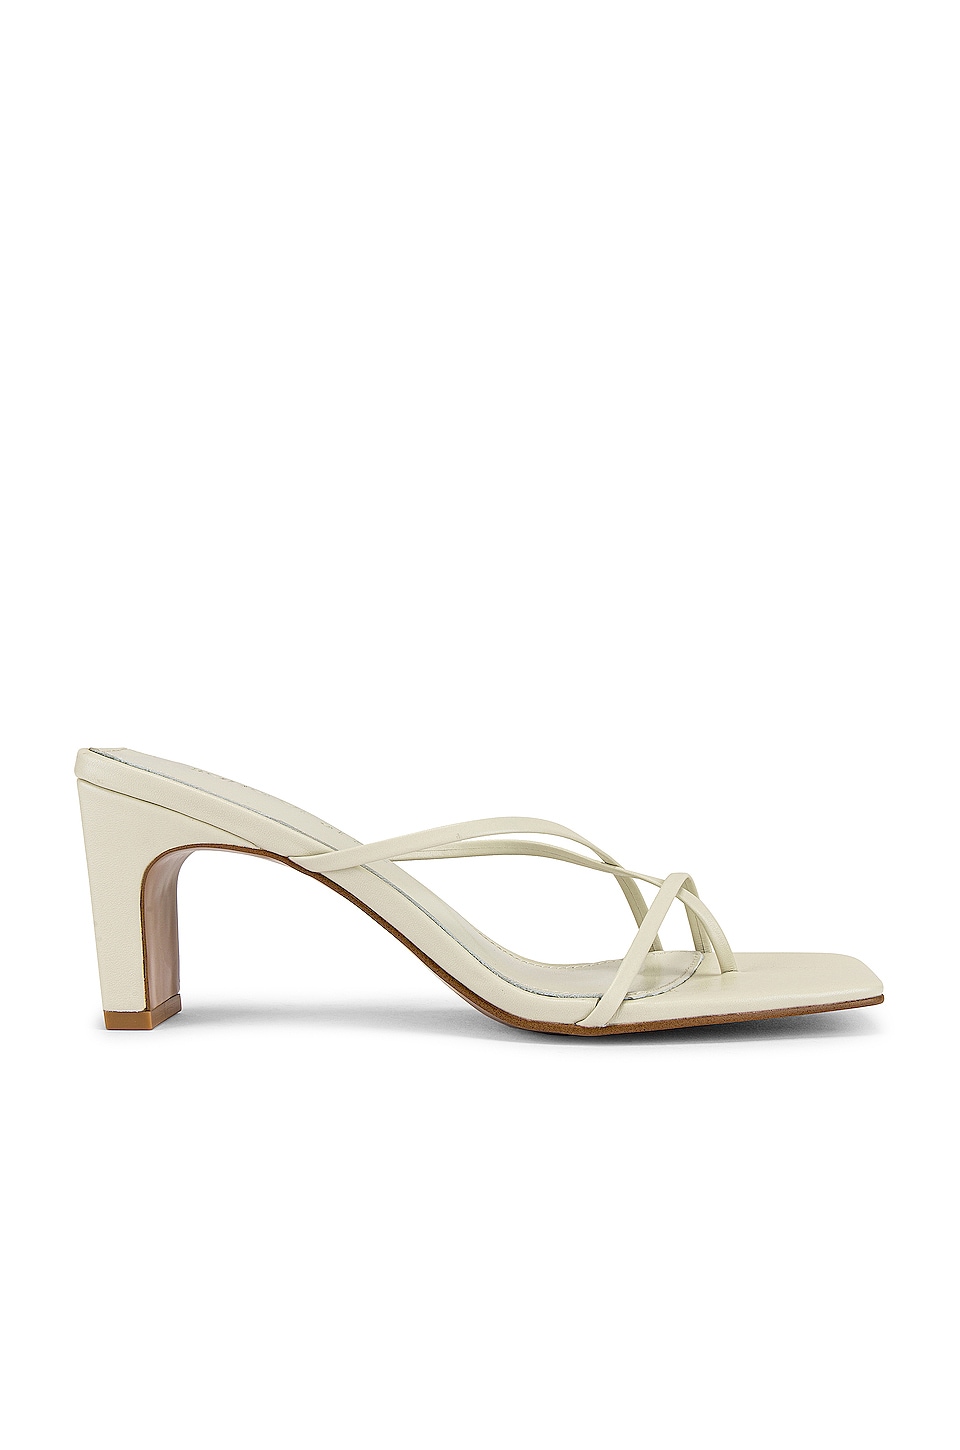 Song of Style Euro Heel in White | REVOLVE